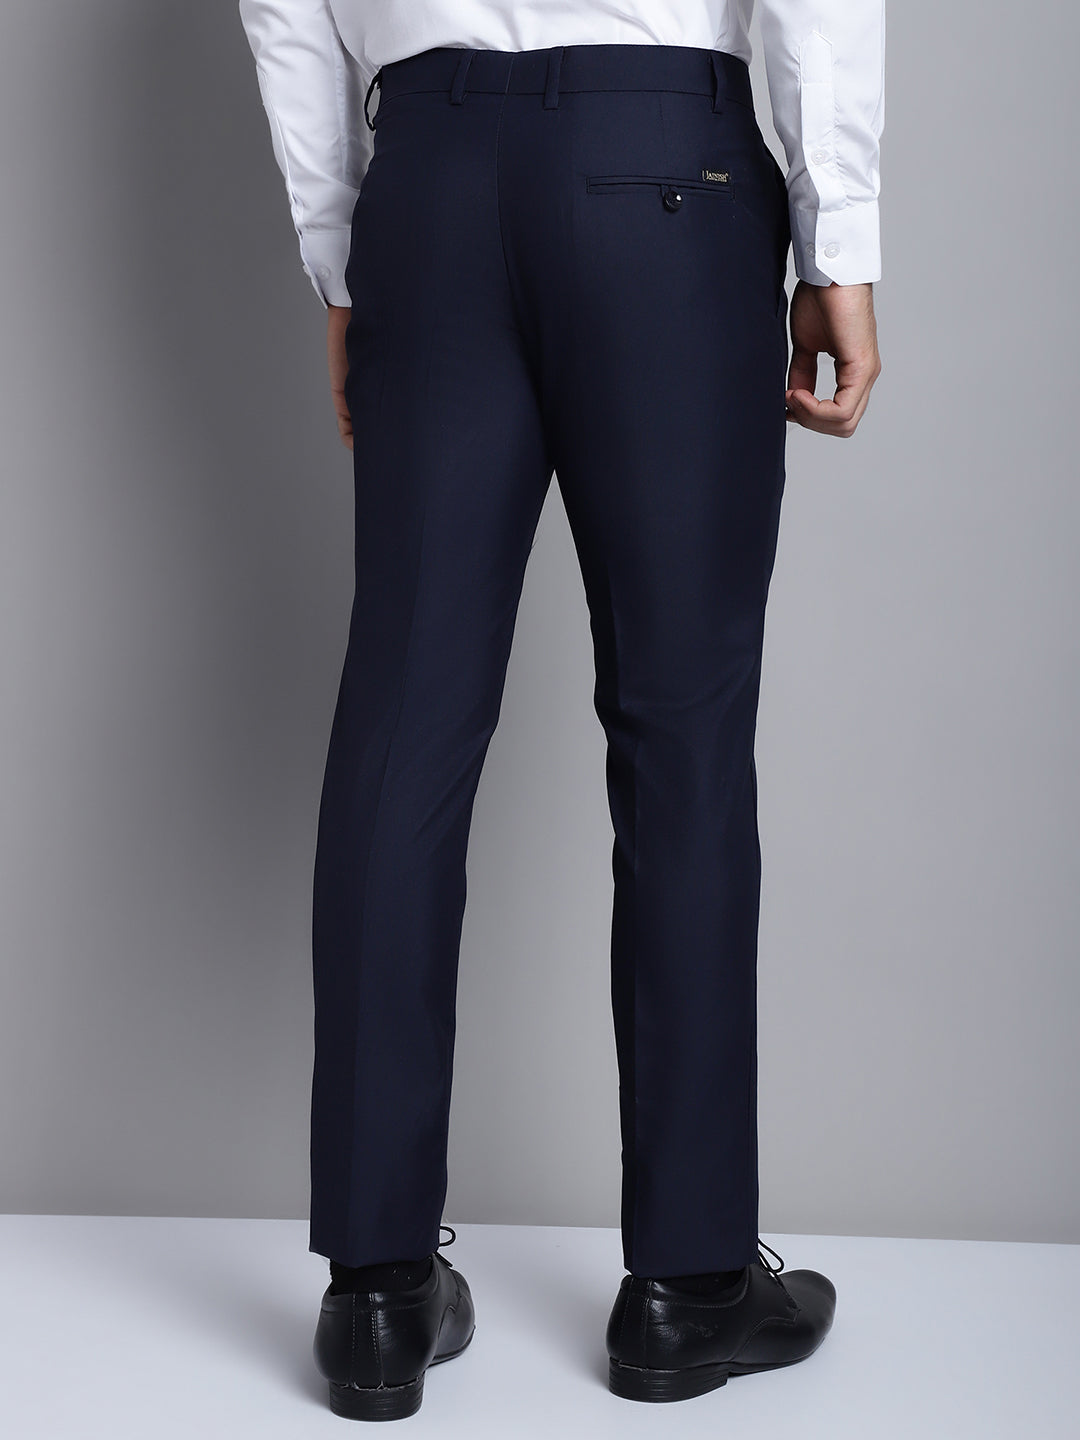 Jainish Men's Navy Tapered Fit Formal Trousers